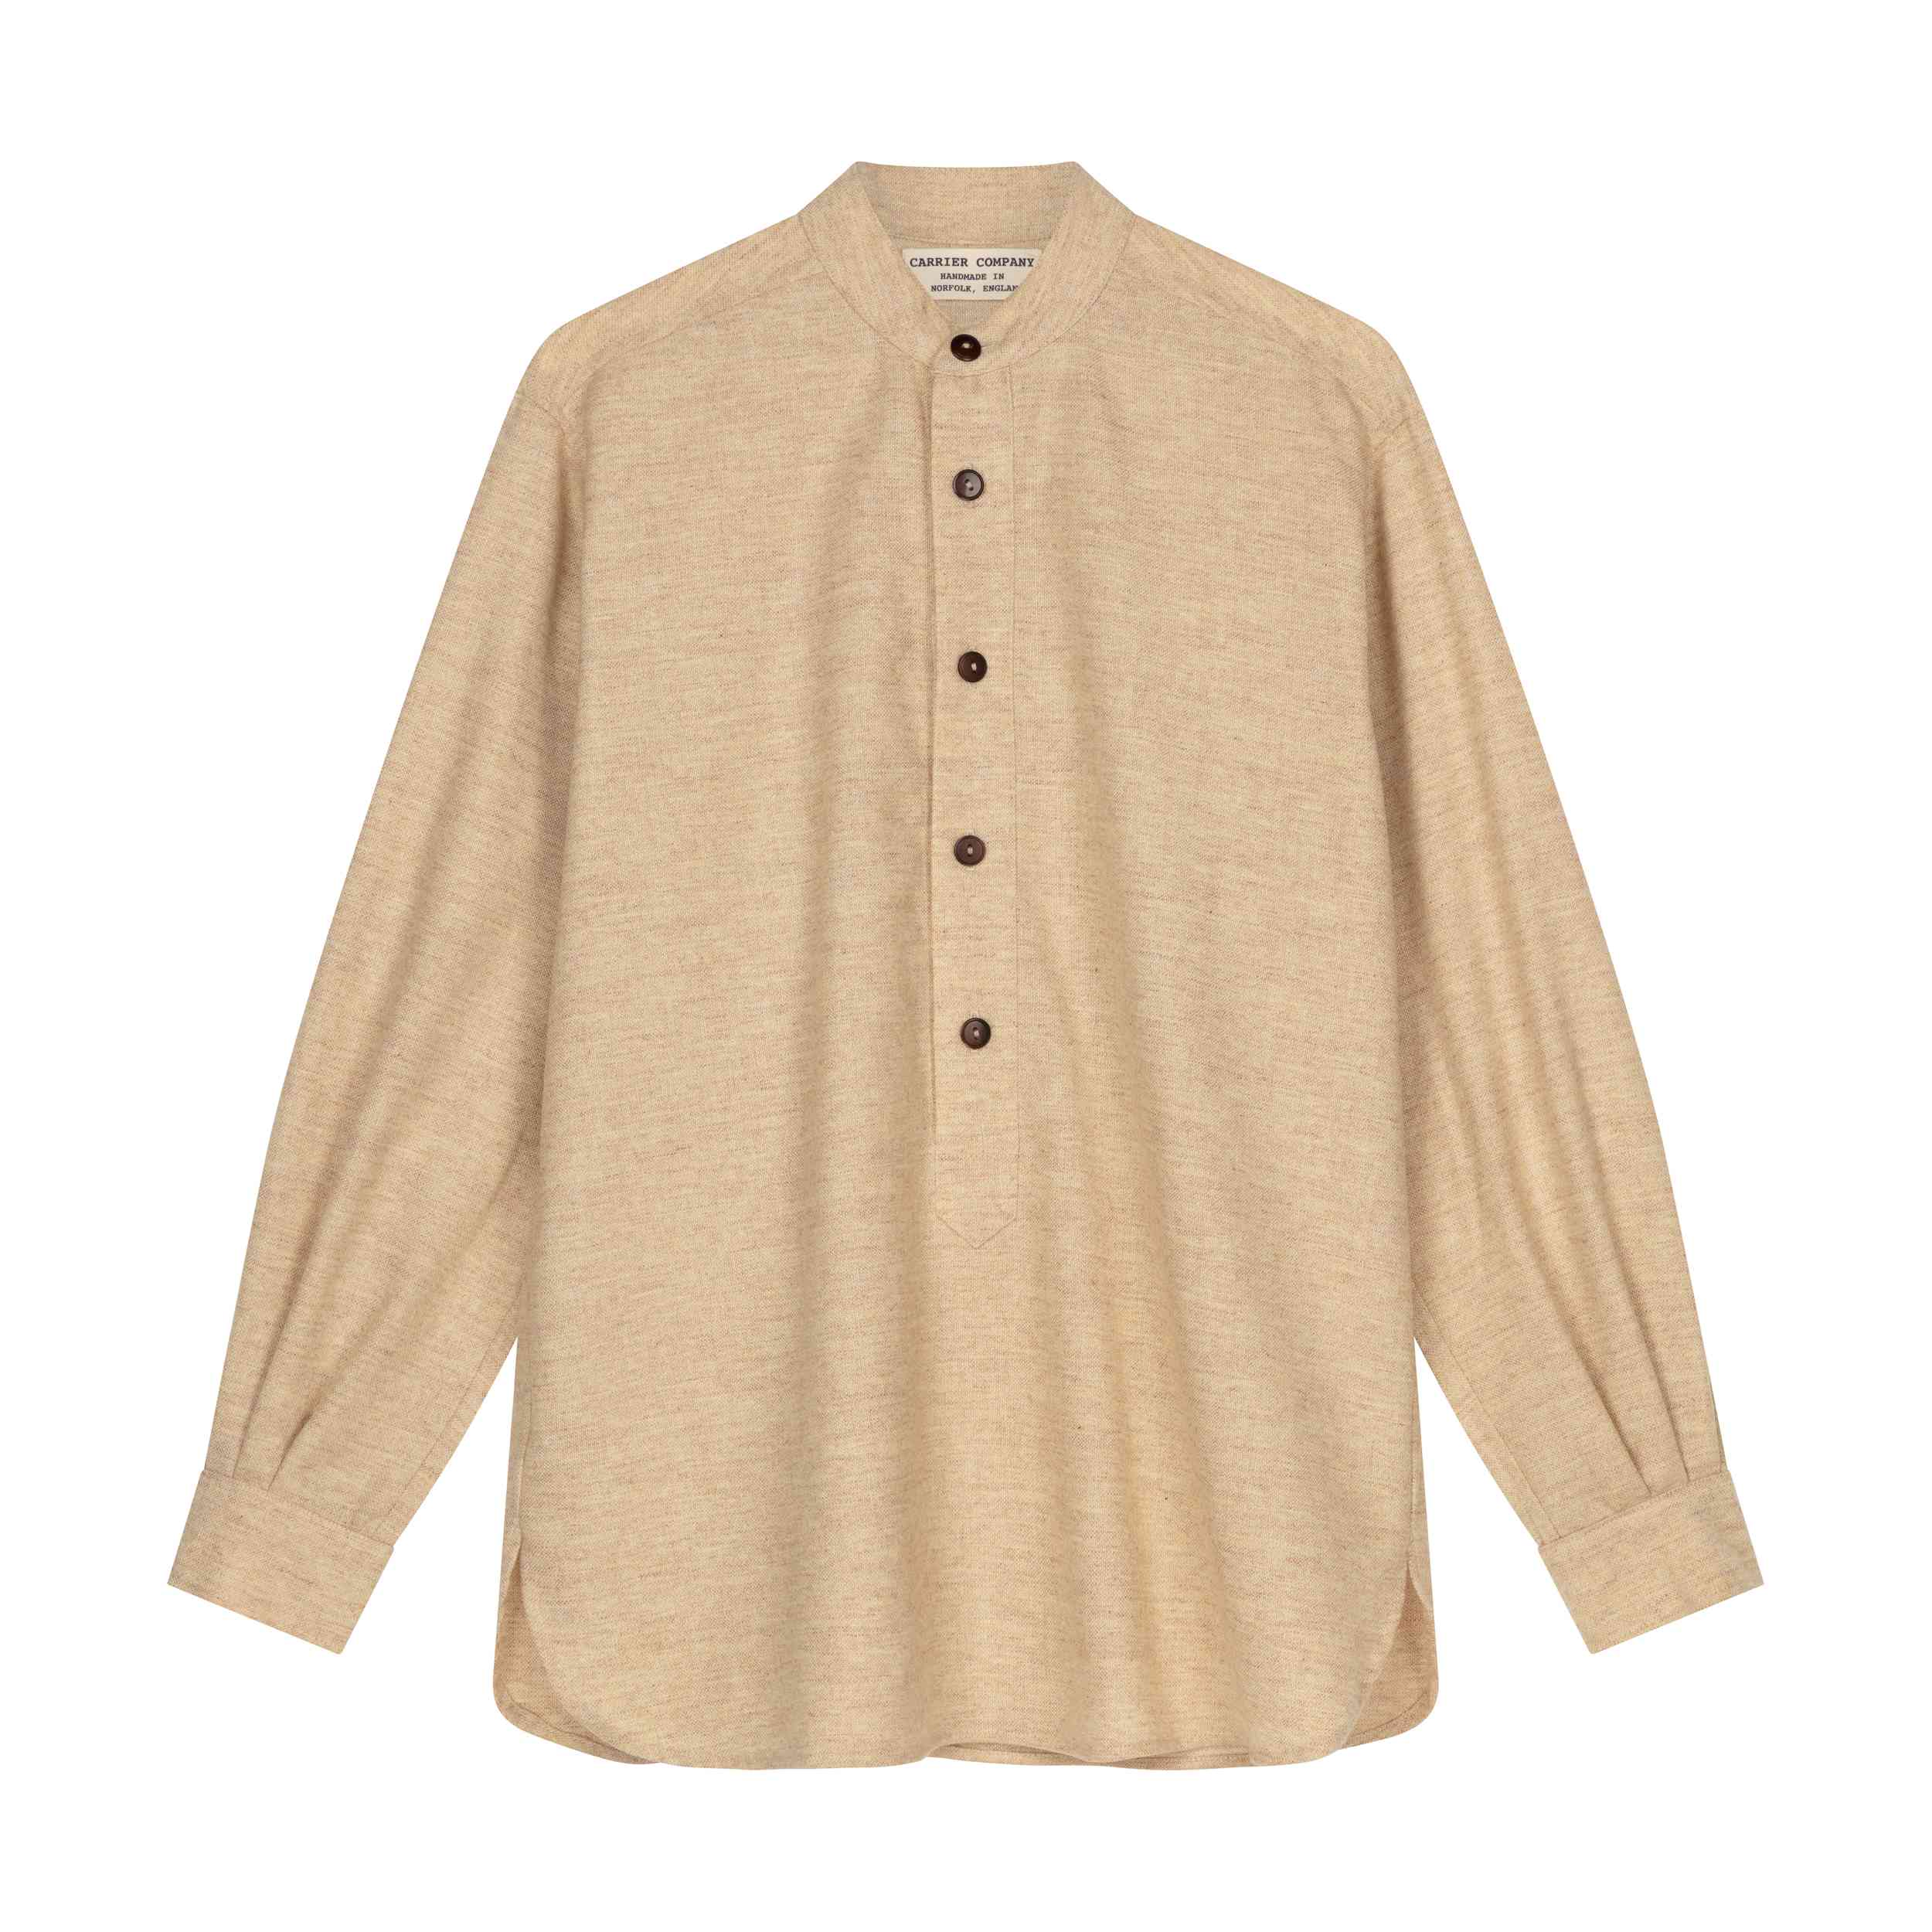 Carrier Company Wool Overshirt in Barley Straw